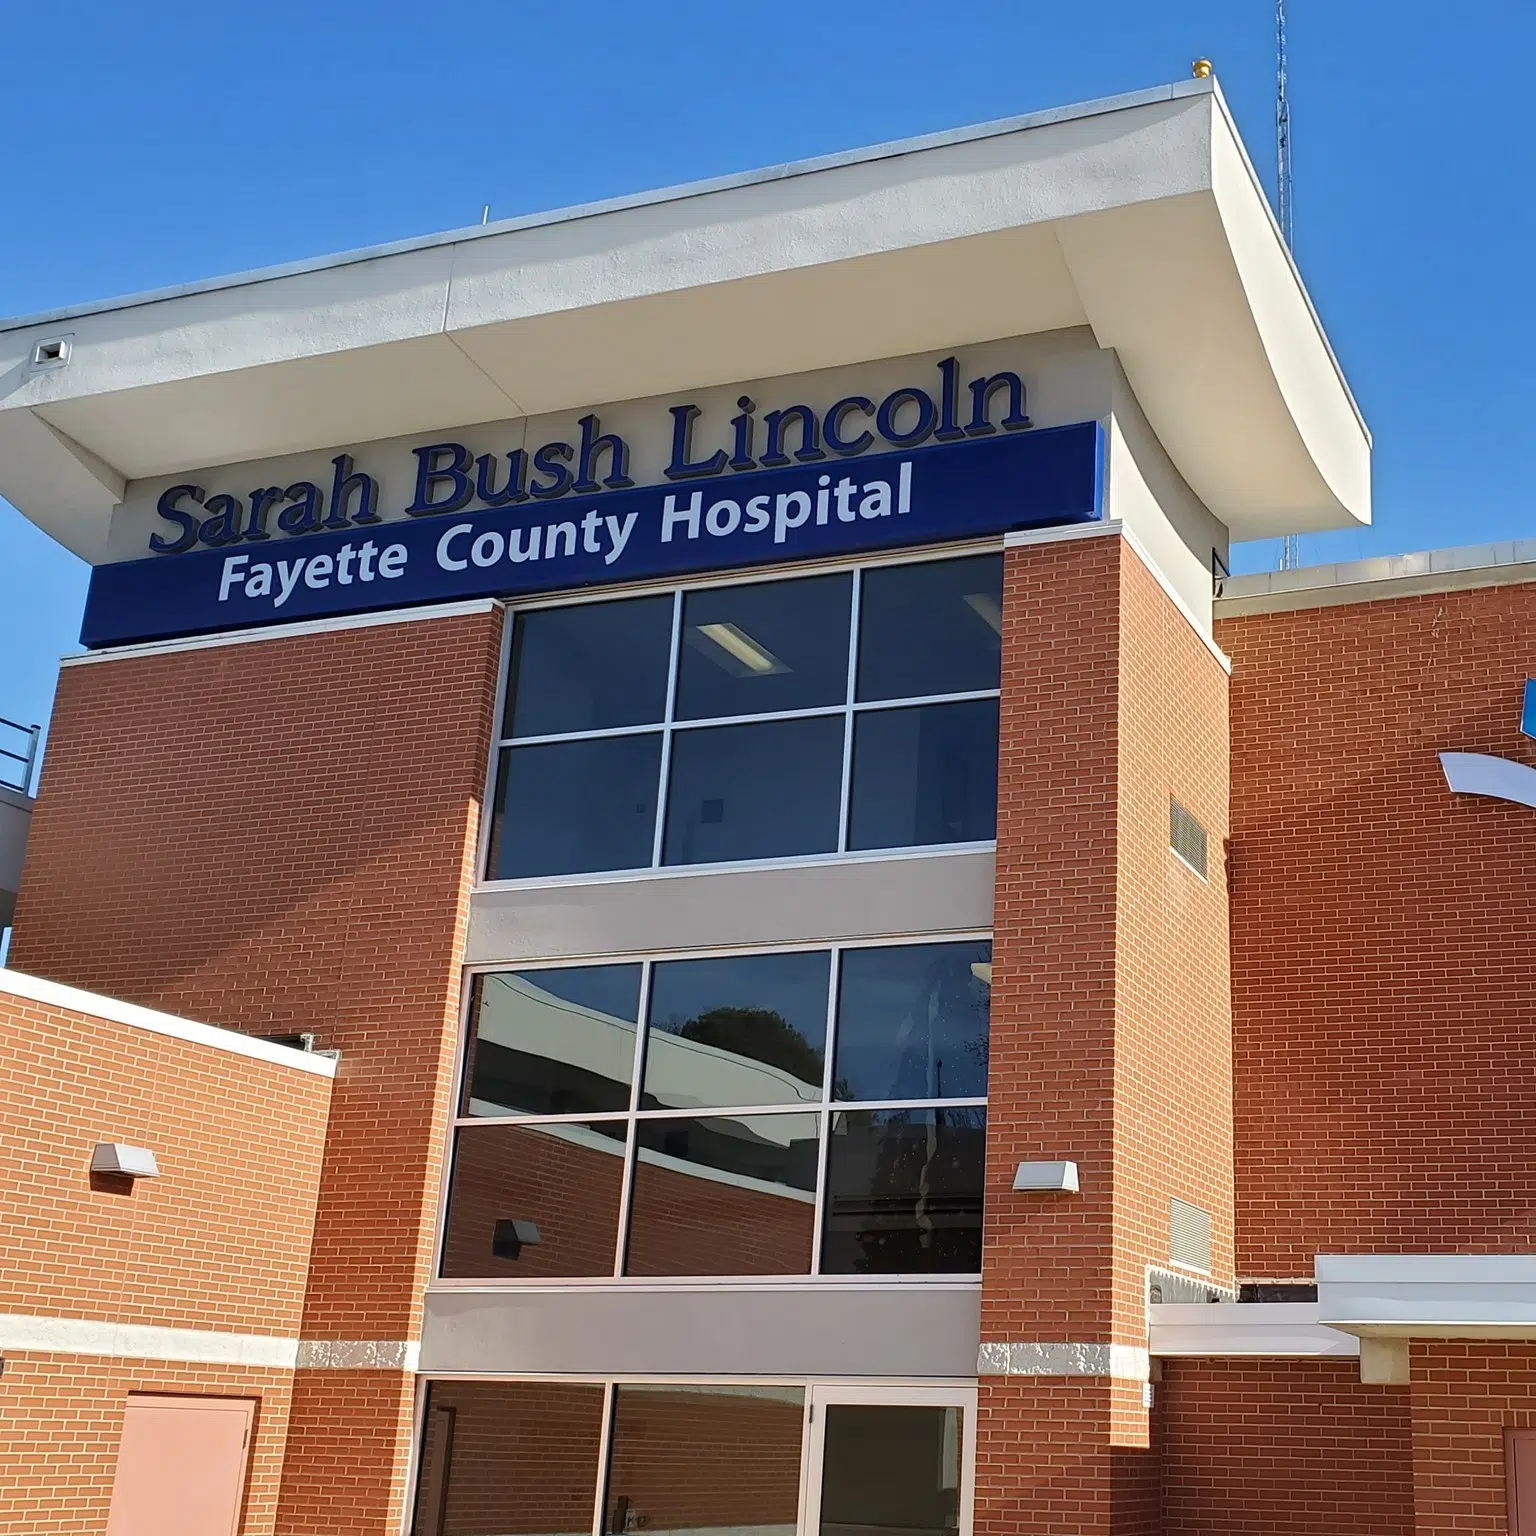 SBL Fayette County Hospital honored for Excellence in Quality of Care